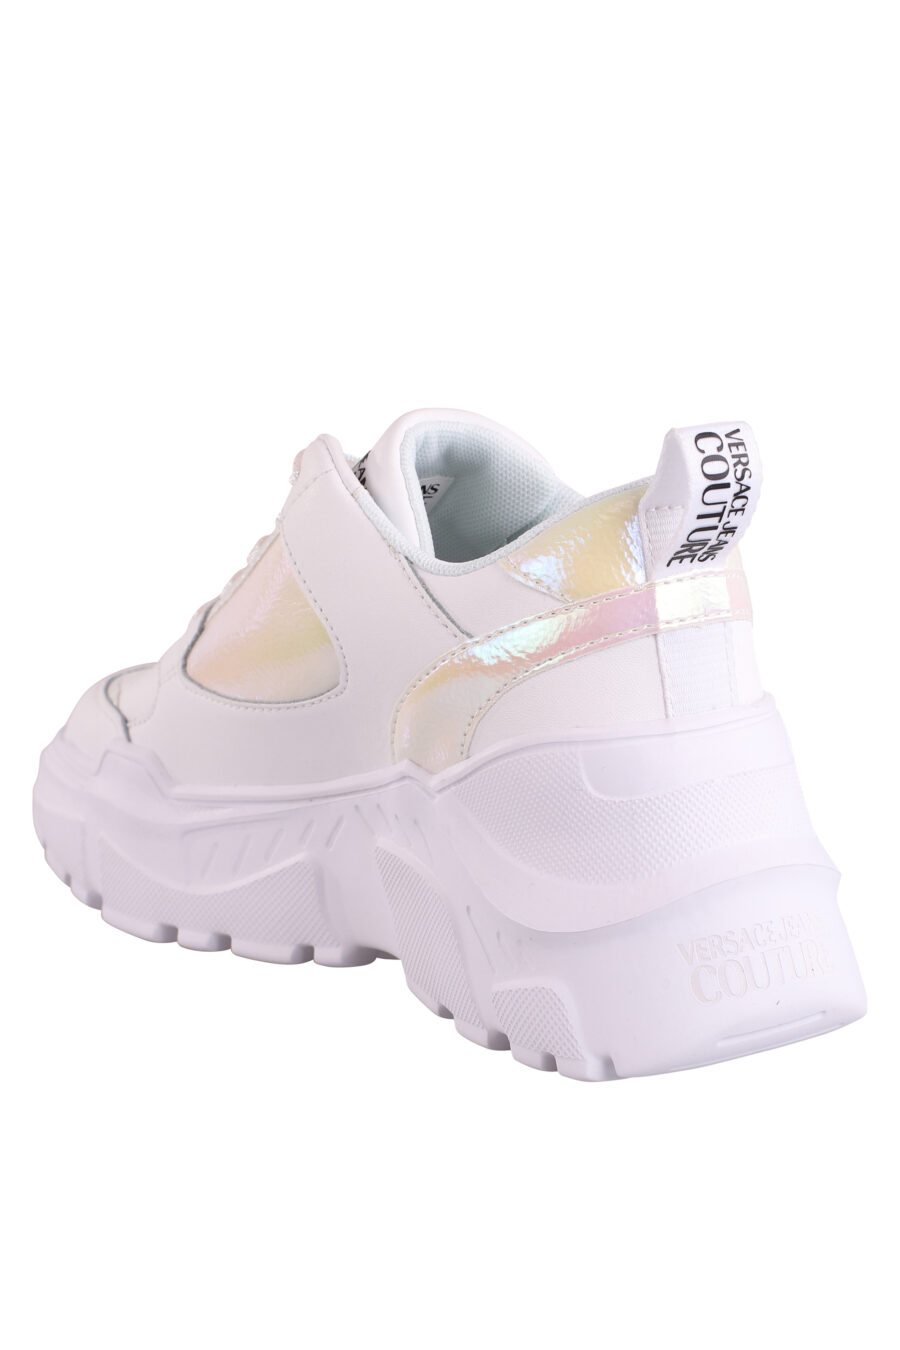 White trainers with hologram details and platform - IMG 9013